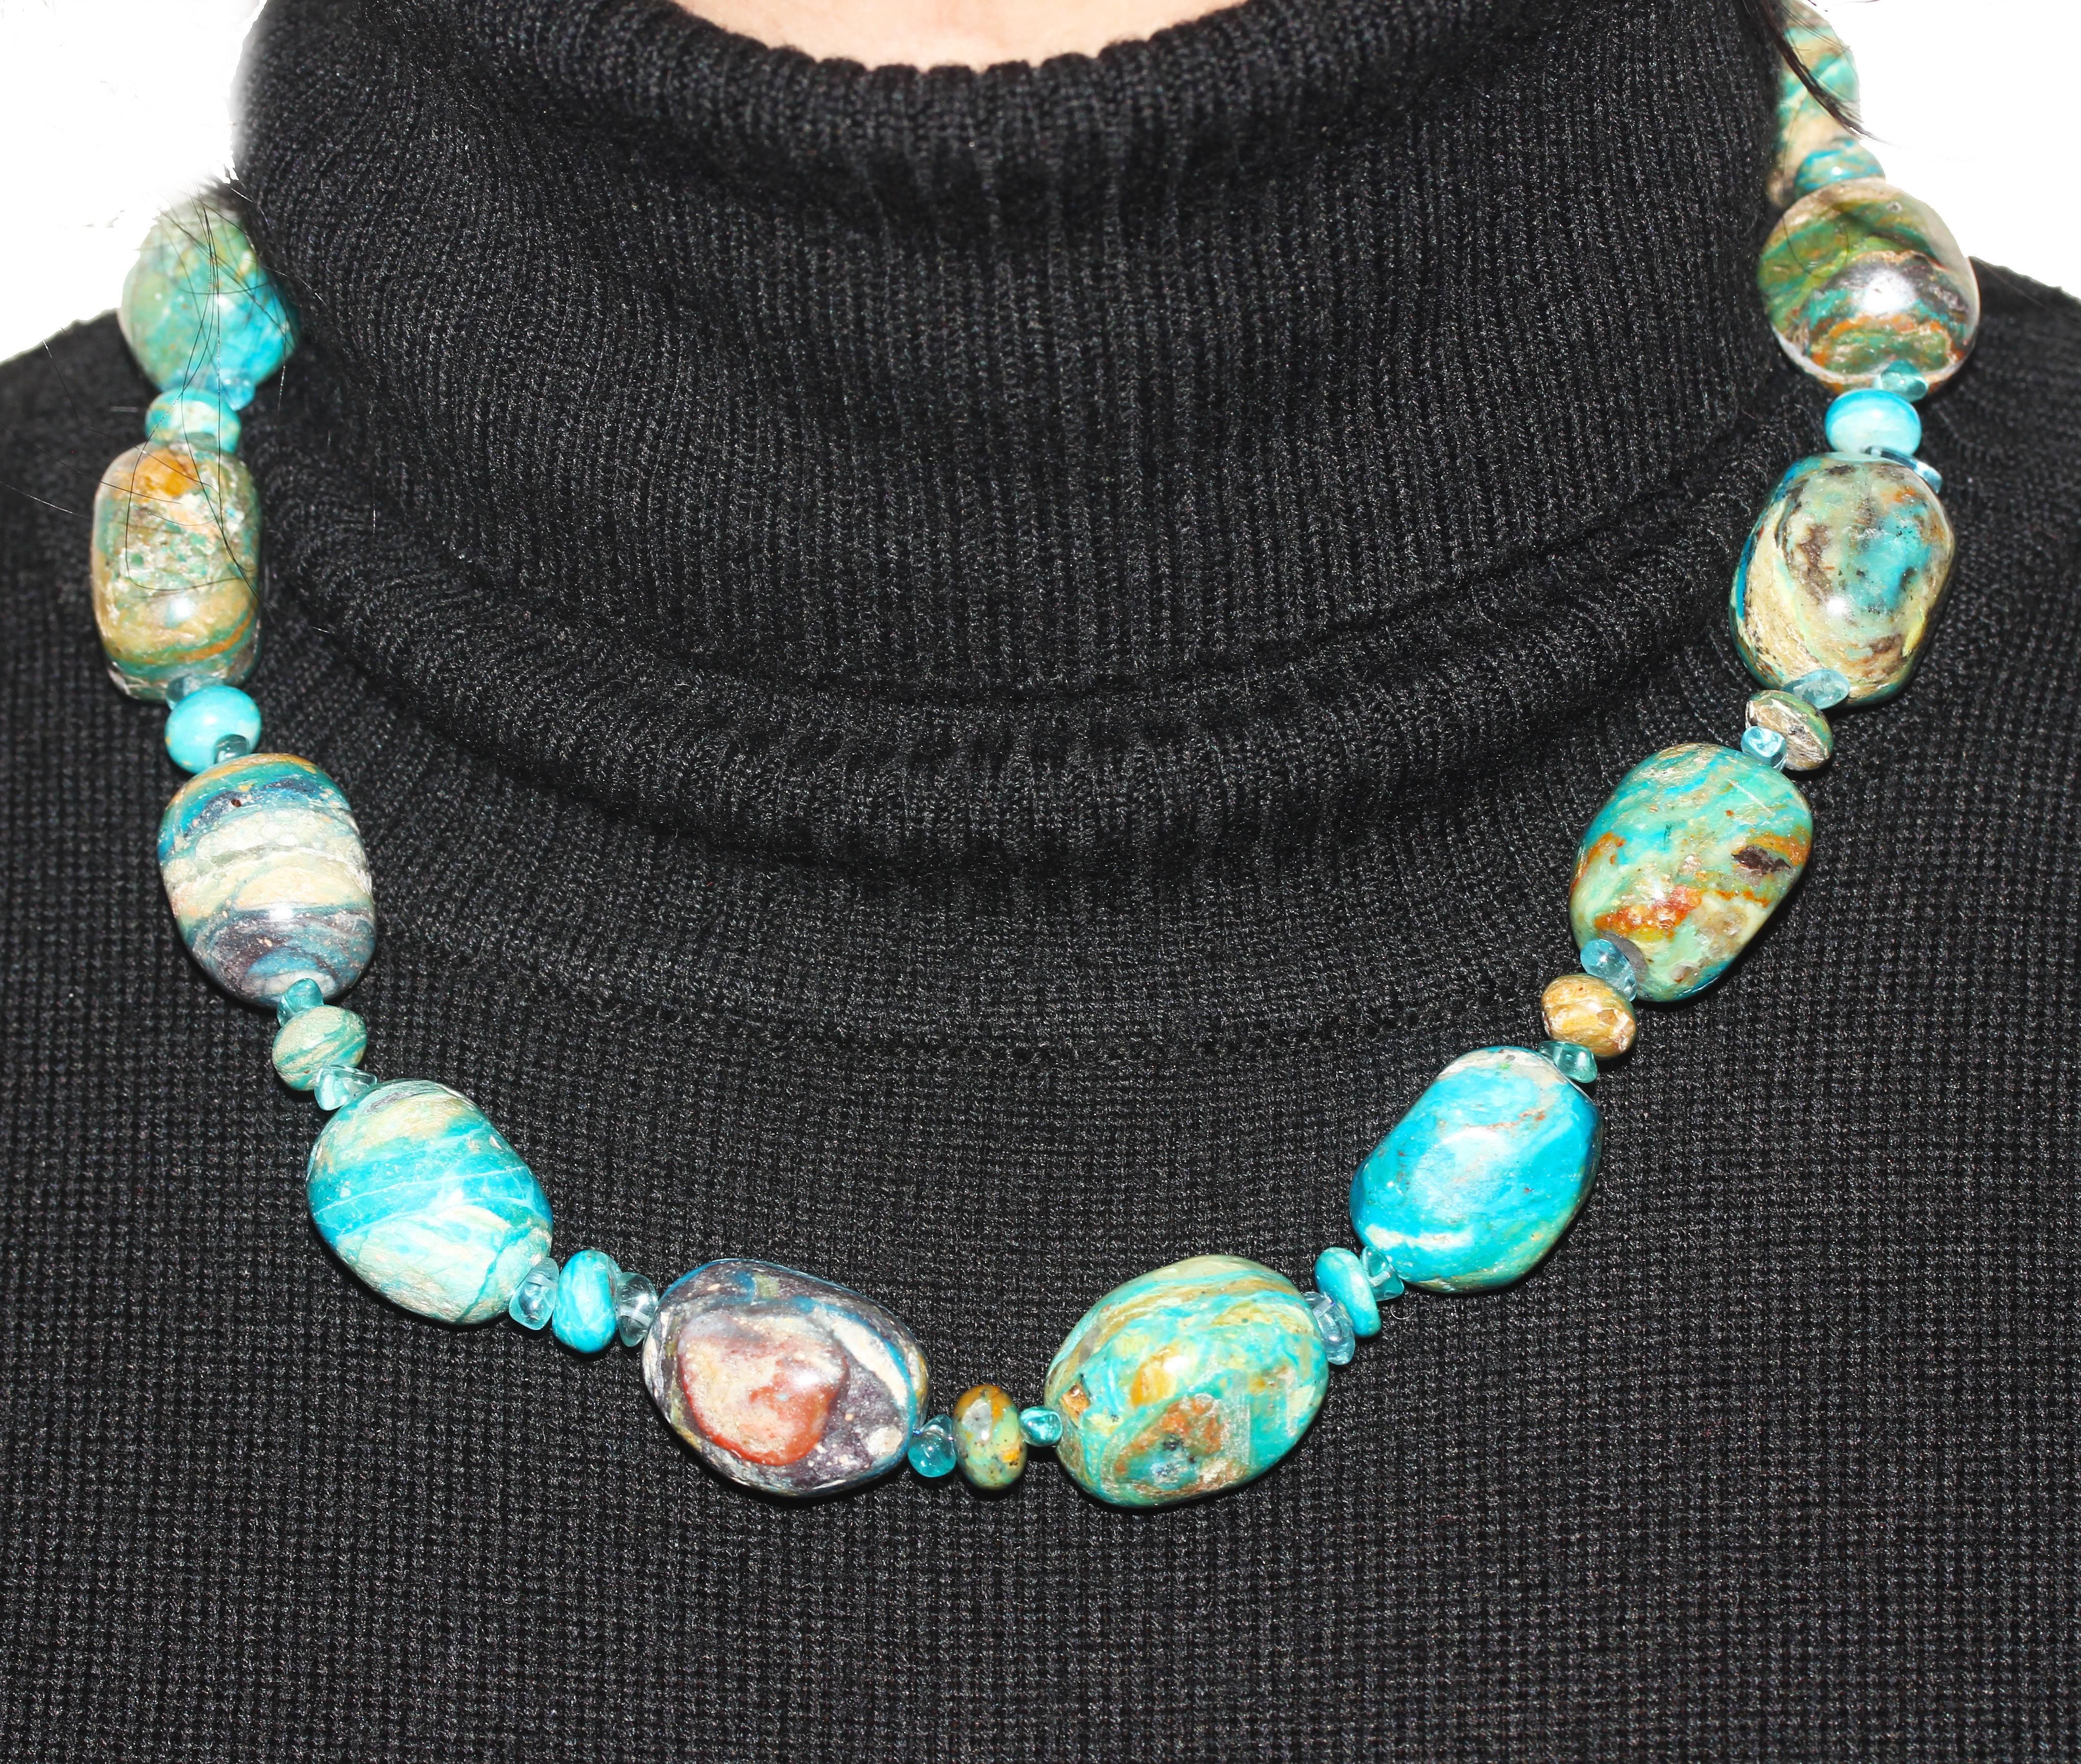 Mixed Cut AJD GORGEOUS RARE Dramatic Blue Peruvian Opal Necklace w/Gold Plated Clasp